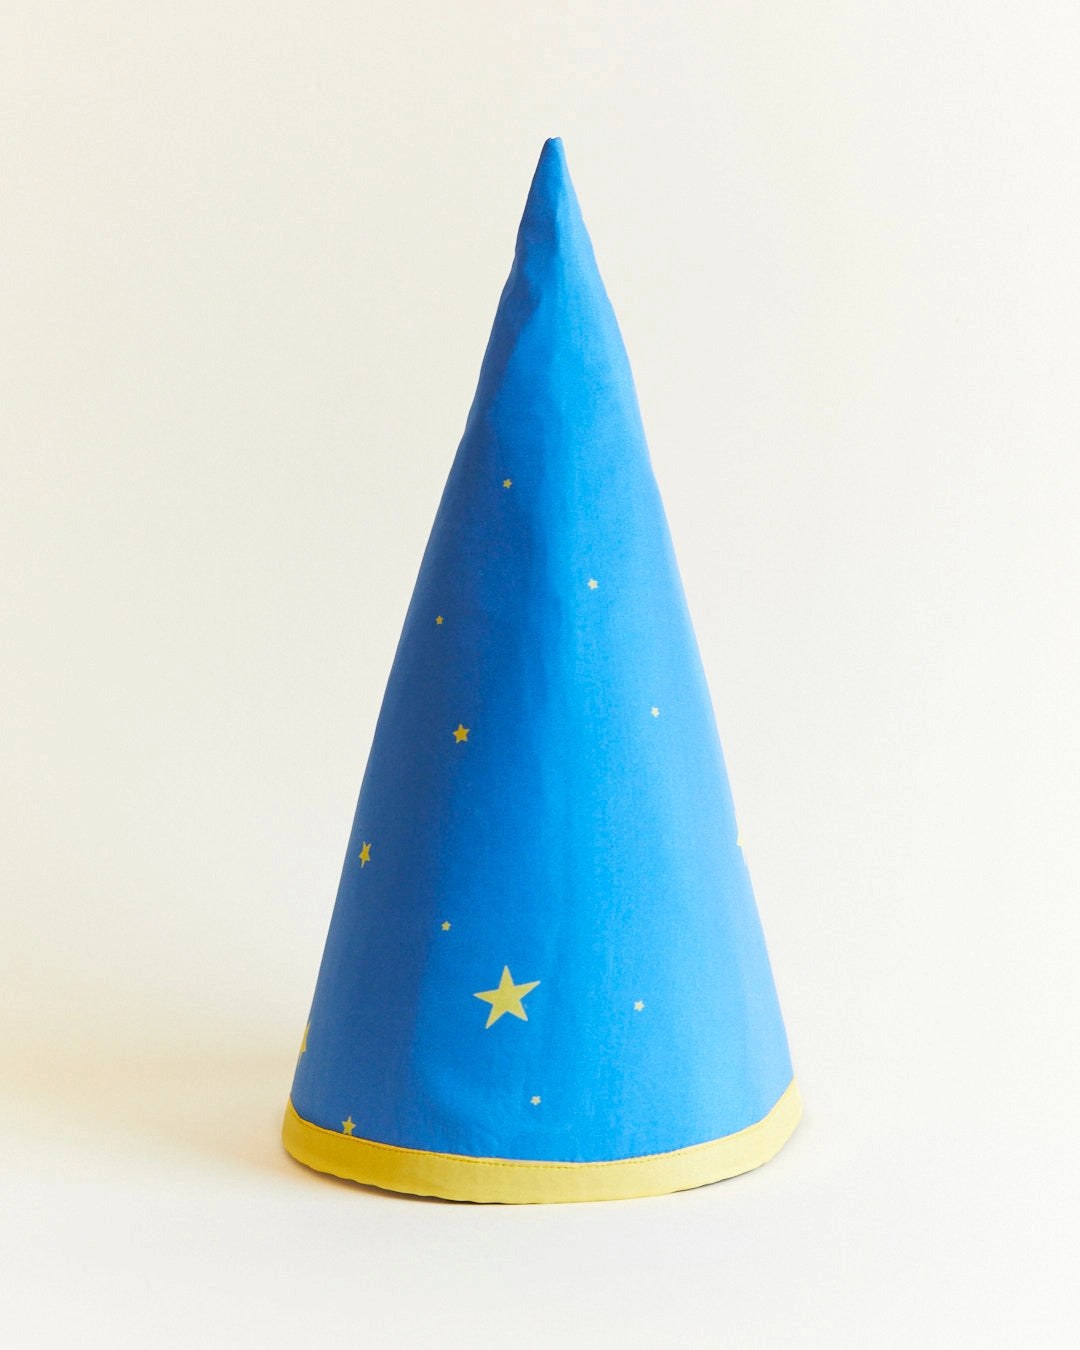 Star Wizard Hat For Dress-Up Play, Halloween Costume